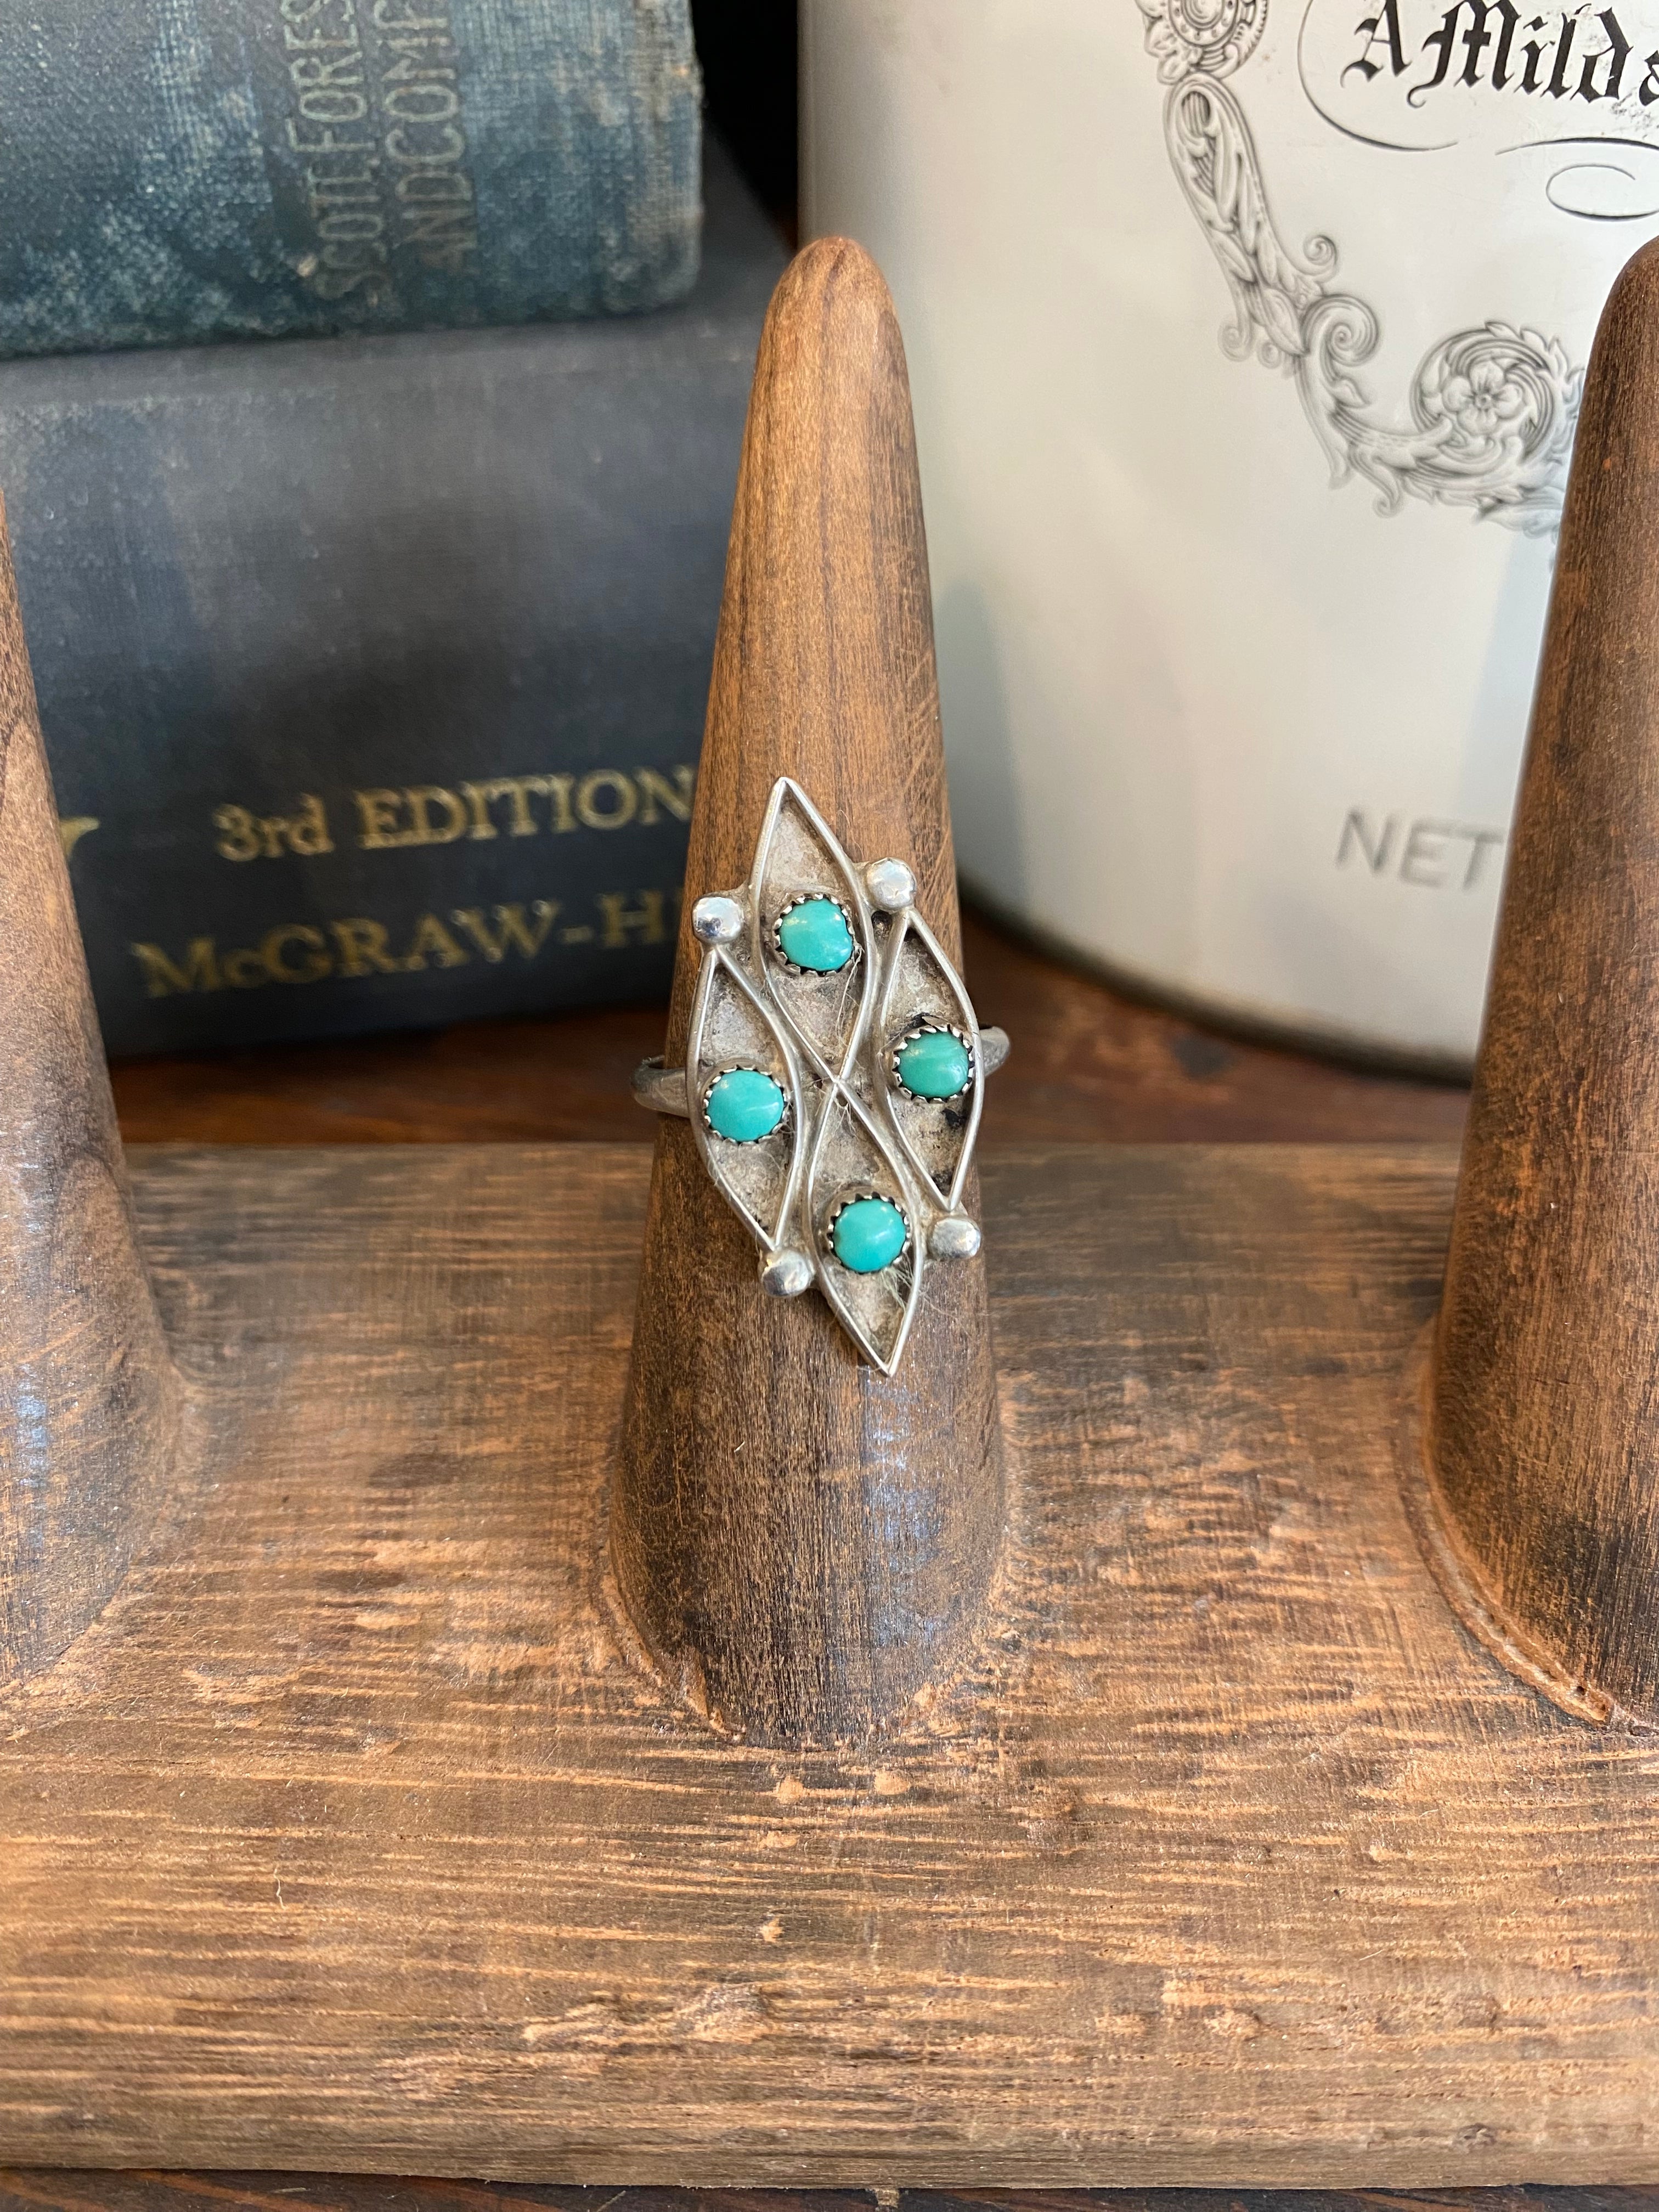 Vintage Sterling Turquoise Inlay Ring The Mustard Seed Collection, The Seed